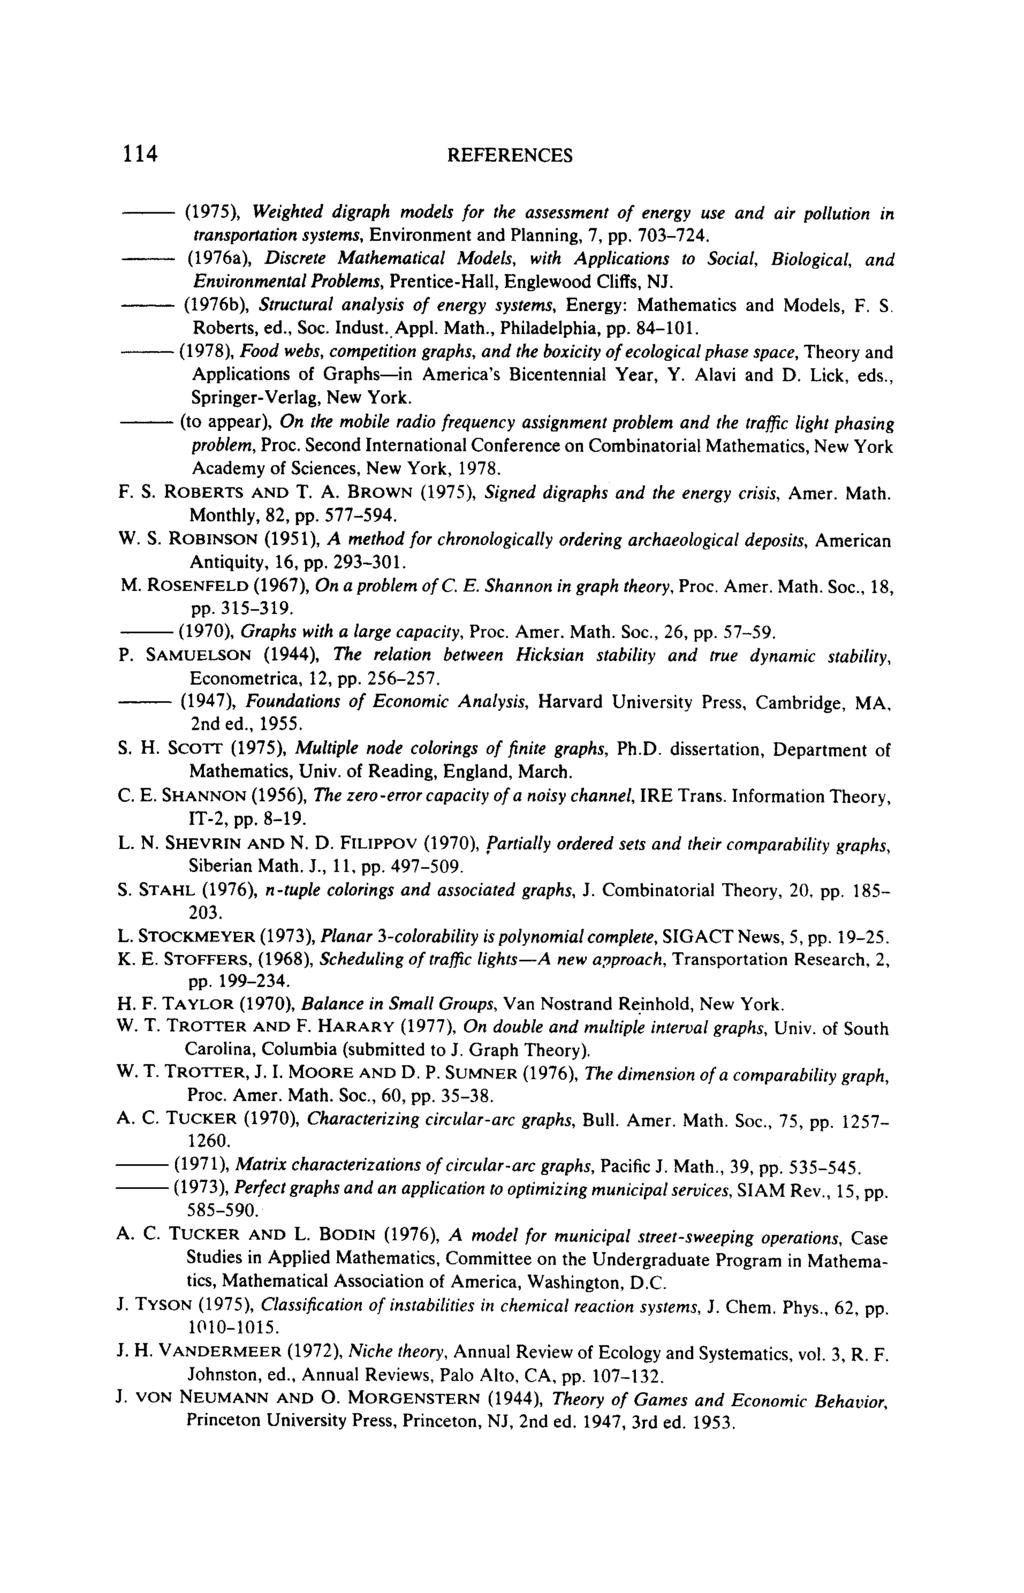 114 REFERENCES (1975), Weighted digraph models for the assessment of energy use and air pollution in transportation systems, Environment and Planning, 7, pp. 703-724.